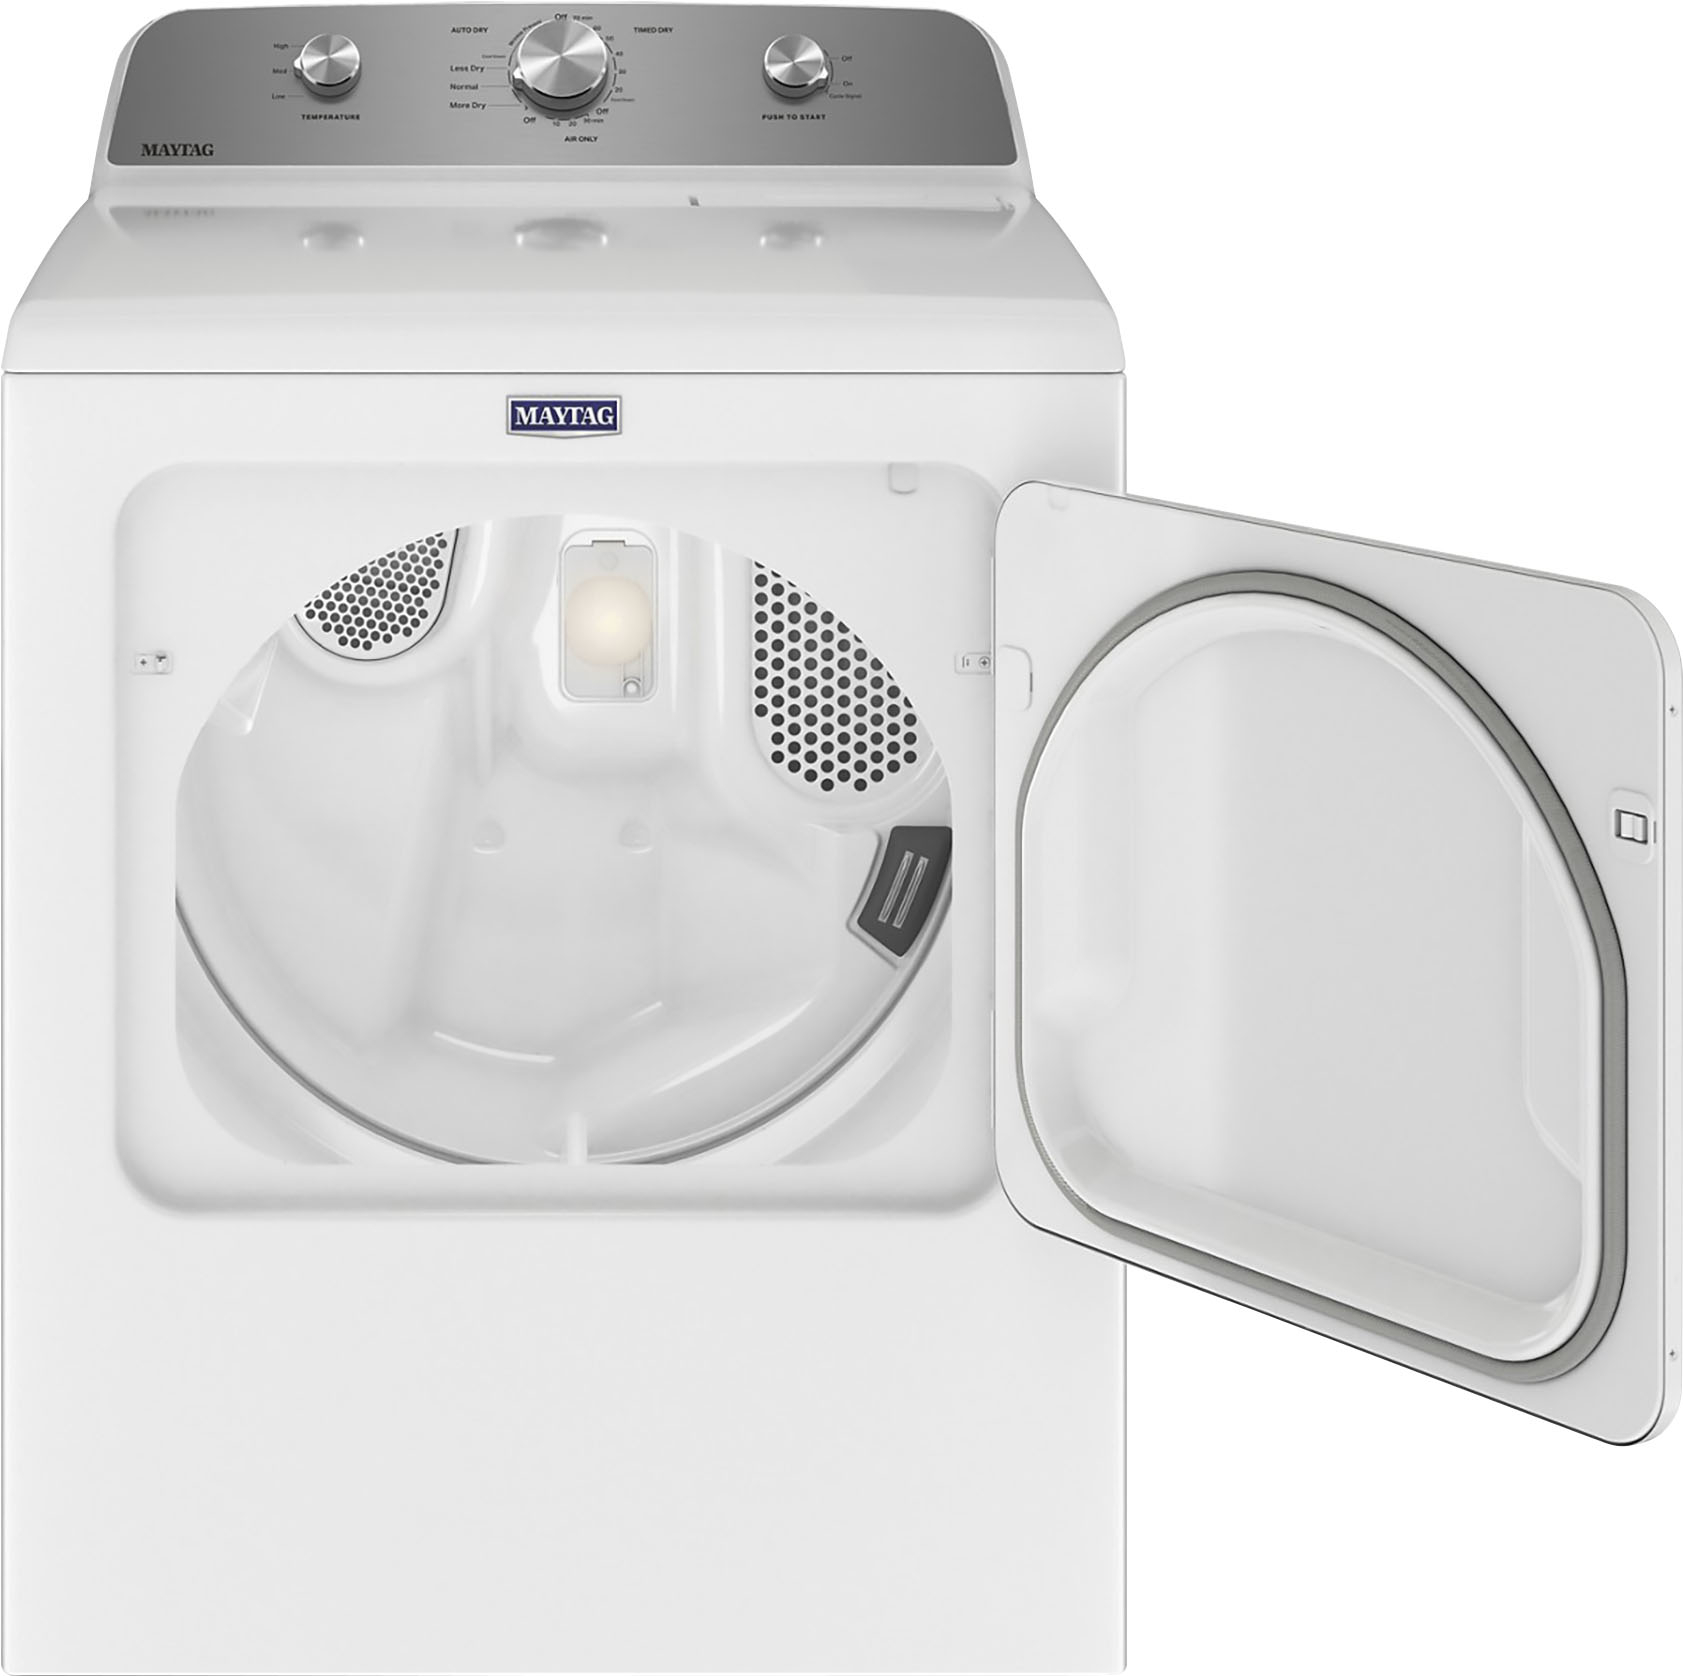 Angle View: Samsung - Geek Squad Certified Refurbished 7.4 cu. ft. Smart Gas Dryer with Steam Sanitize+ - White